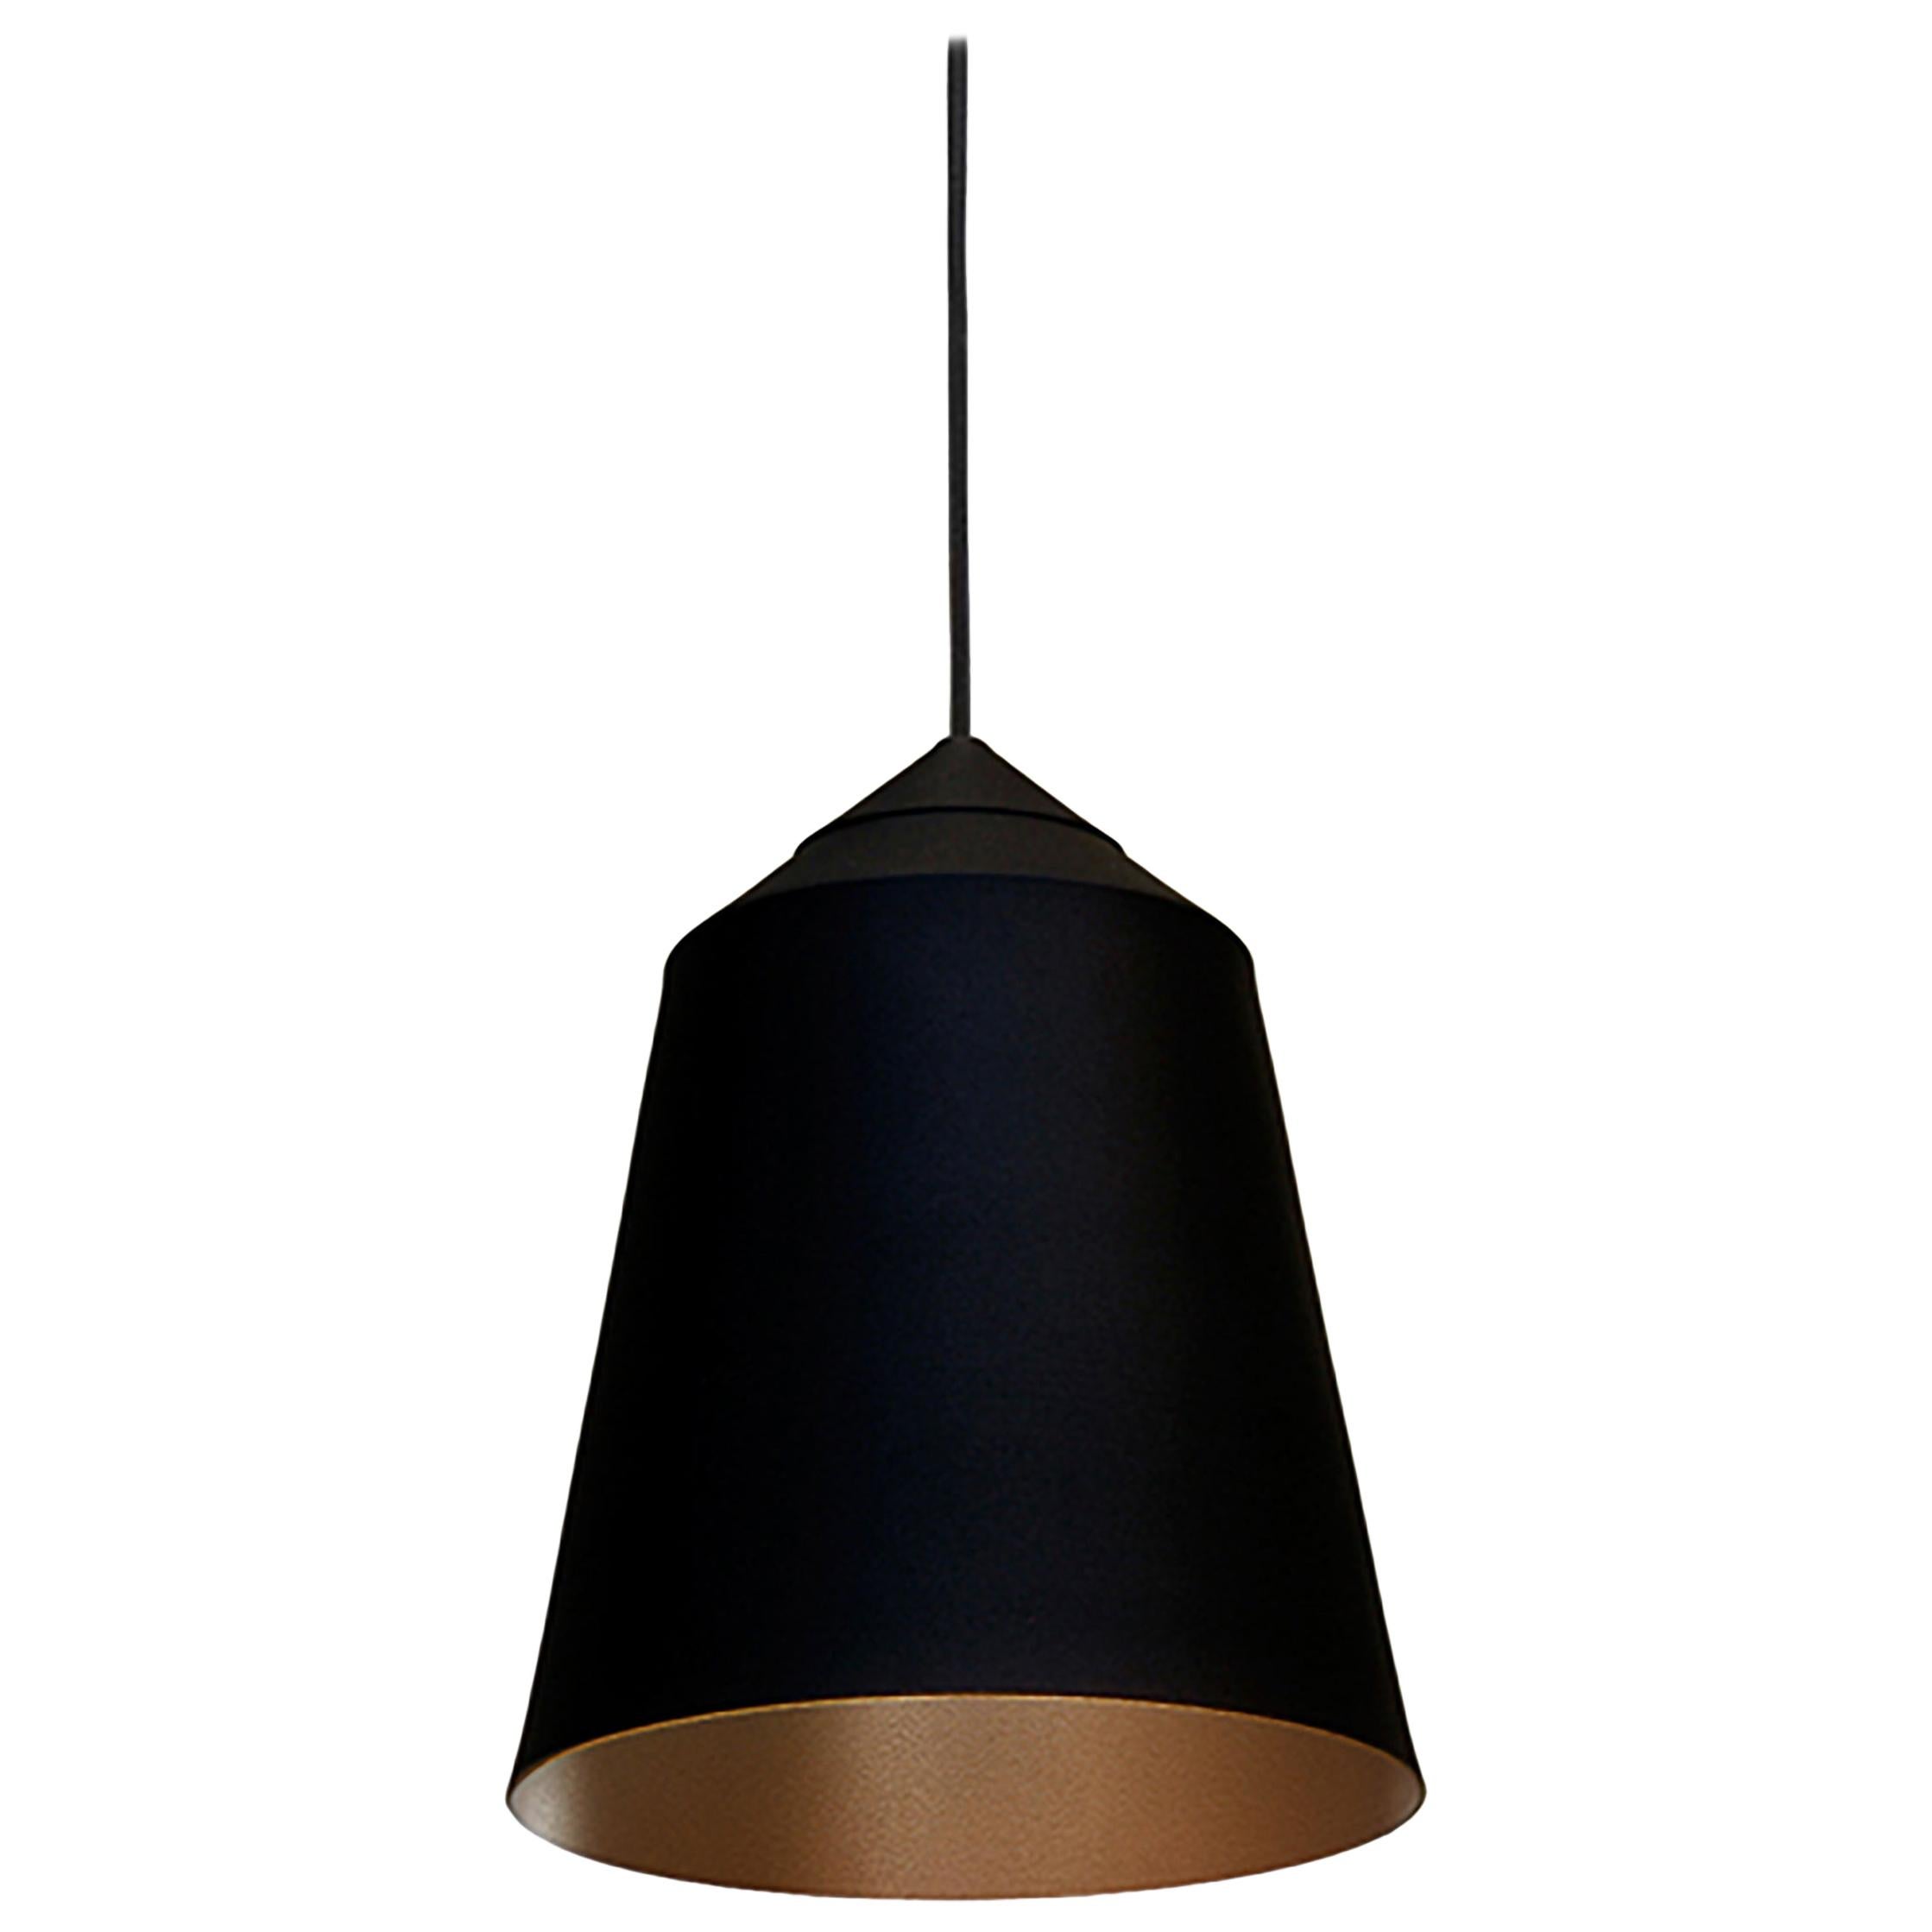 Circus Pendant Light Design By Corinna Warm For Warm Small Black/Bronze In Stock For Sale